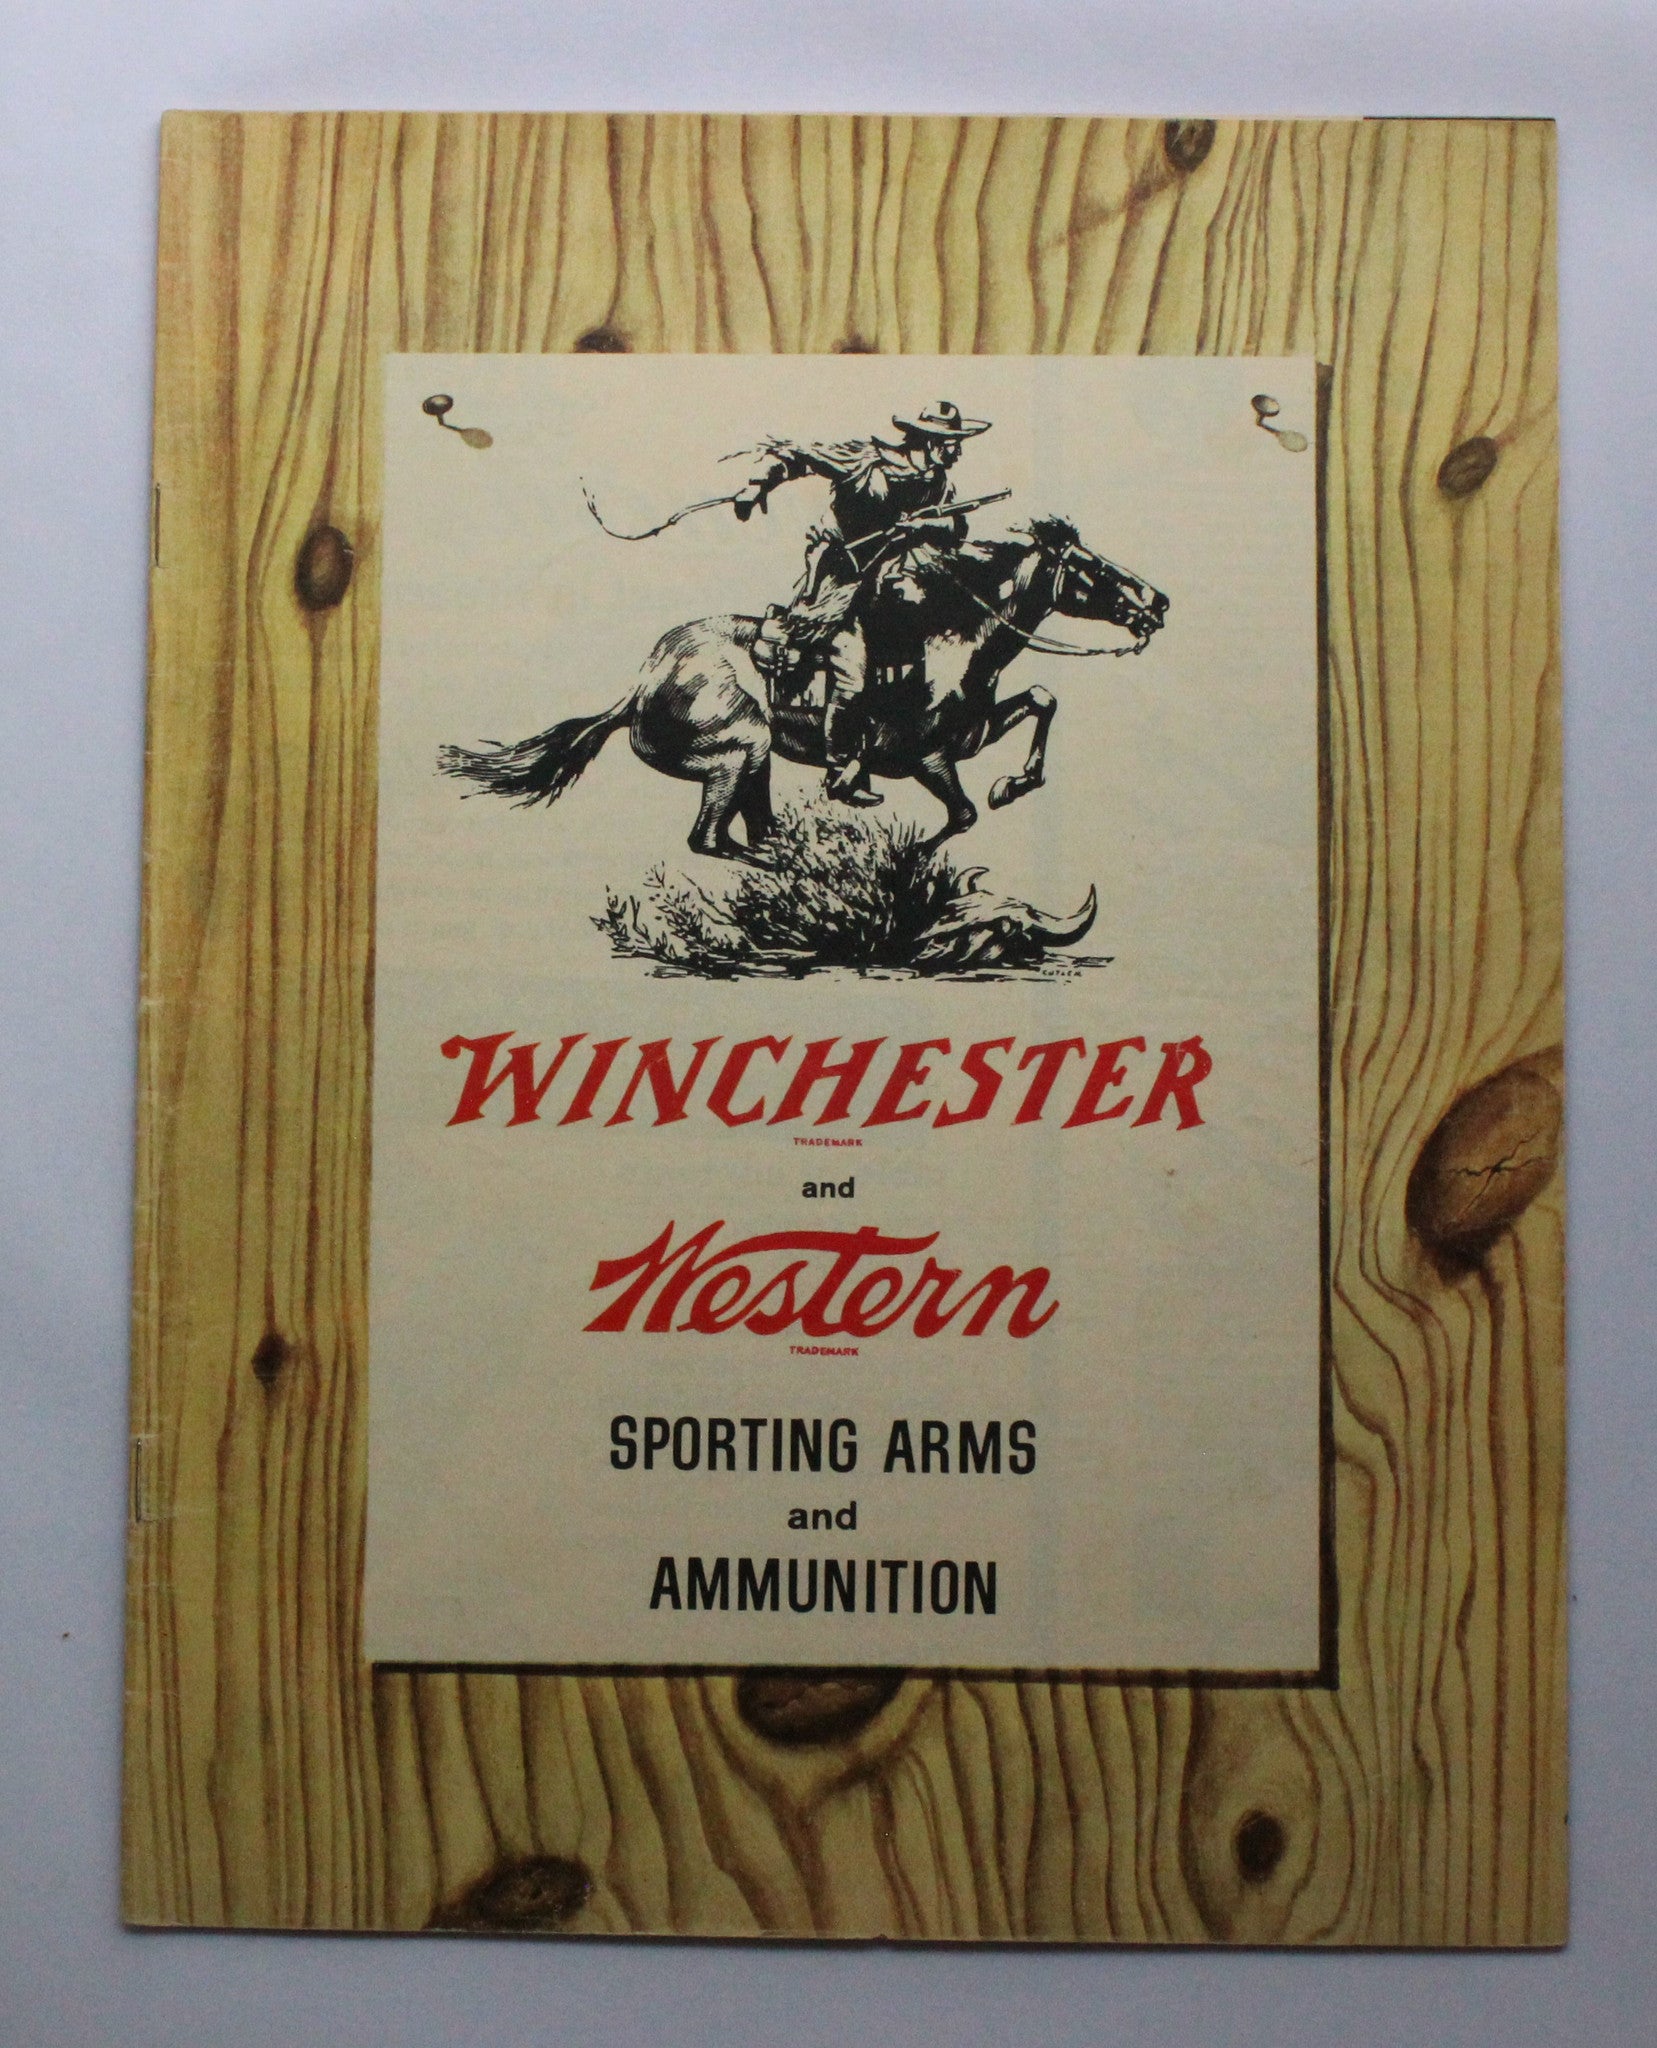 1960 Winchester & Western Sporting Arms & Ammunition Catalog - No. 2359